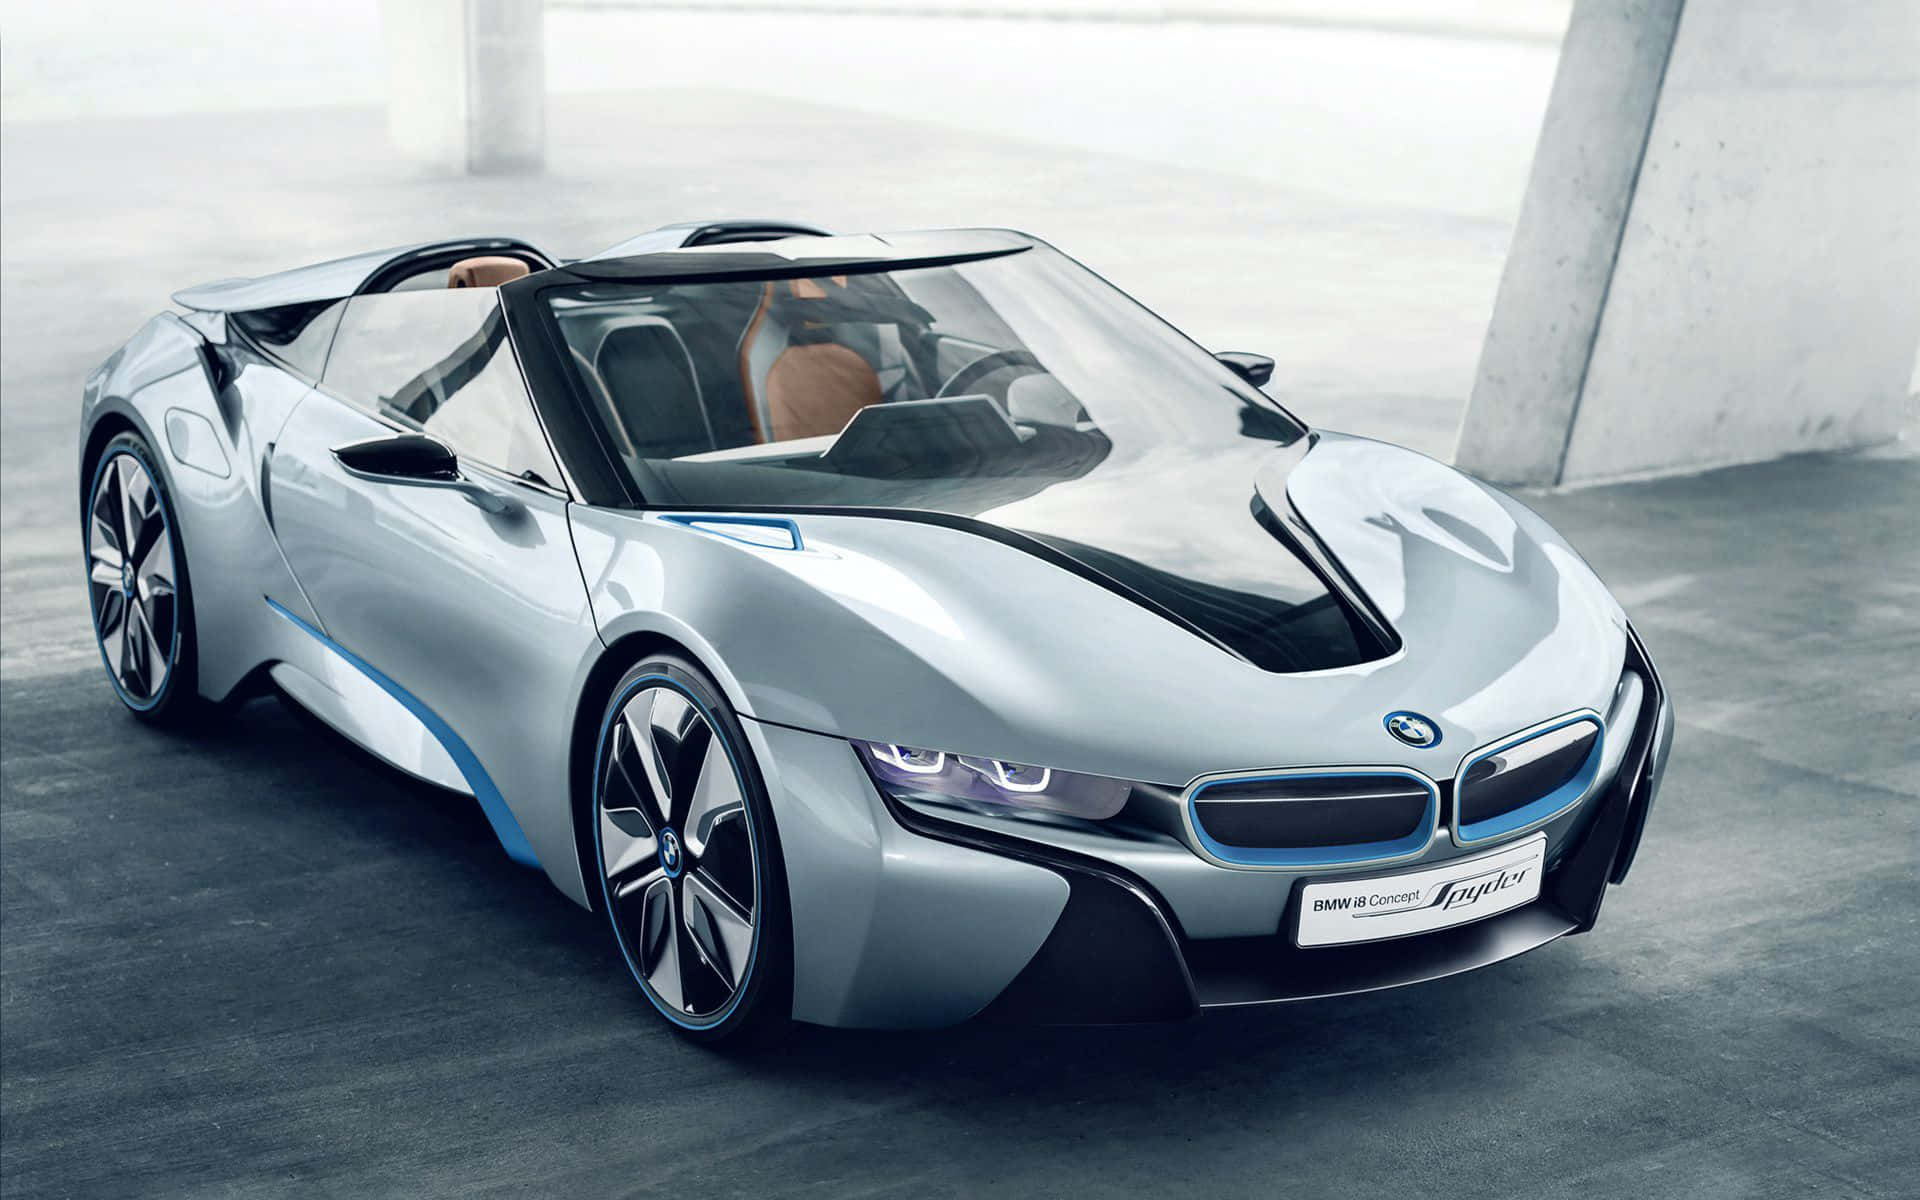 Free Bmw Cars Wallpaper Downloads, [100+] Bmw Cars Wallpapers for FREE |  